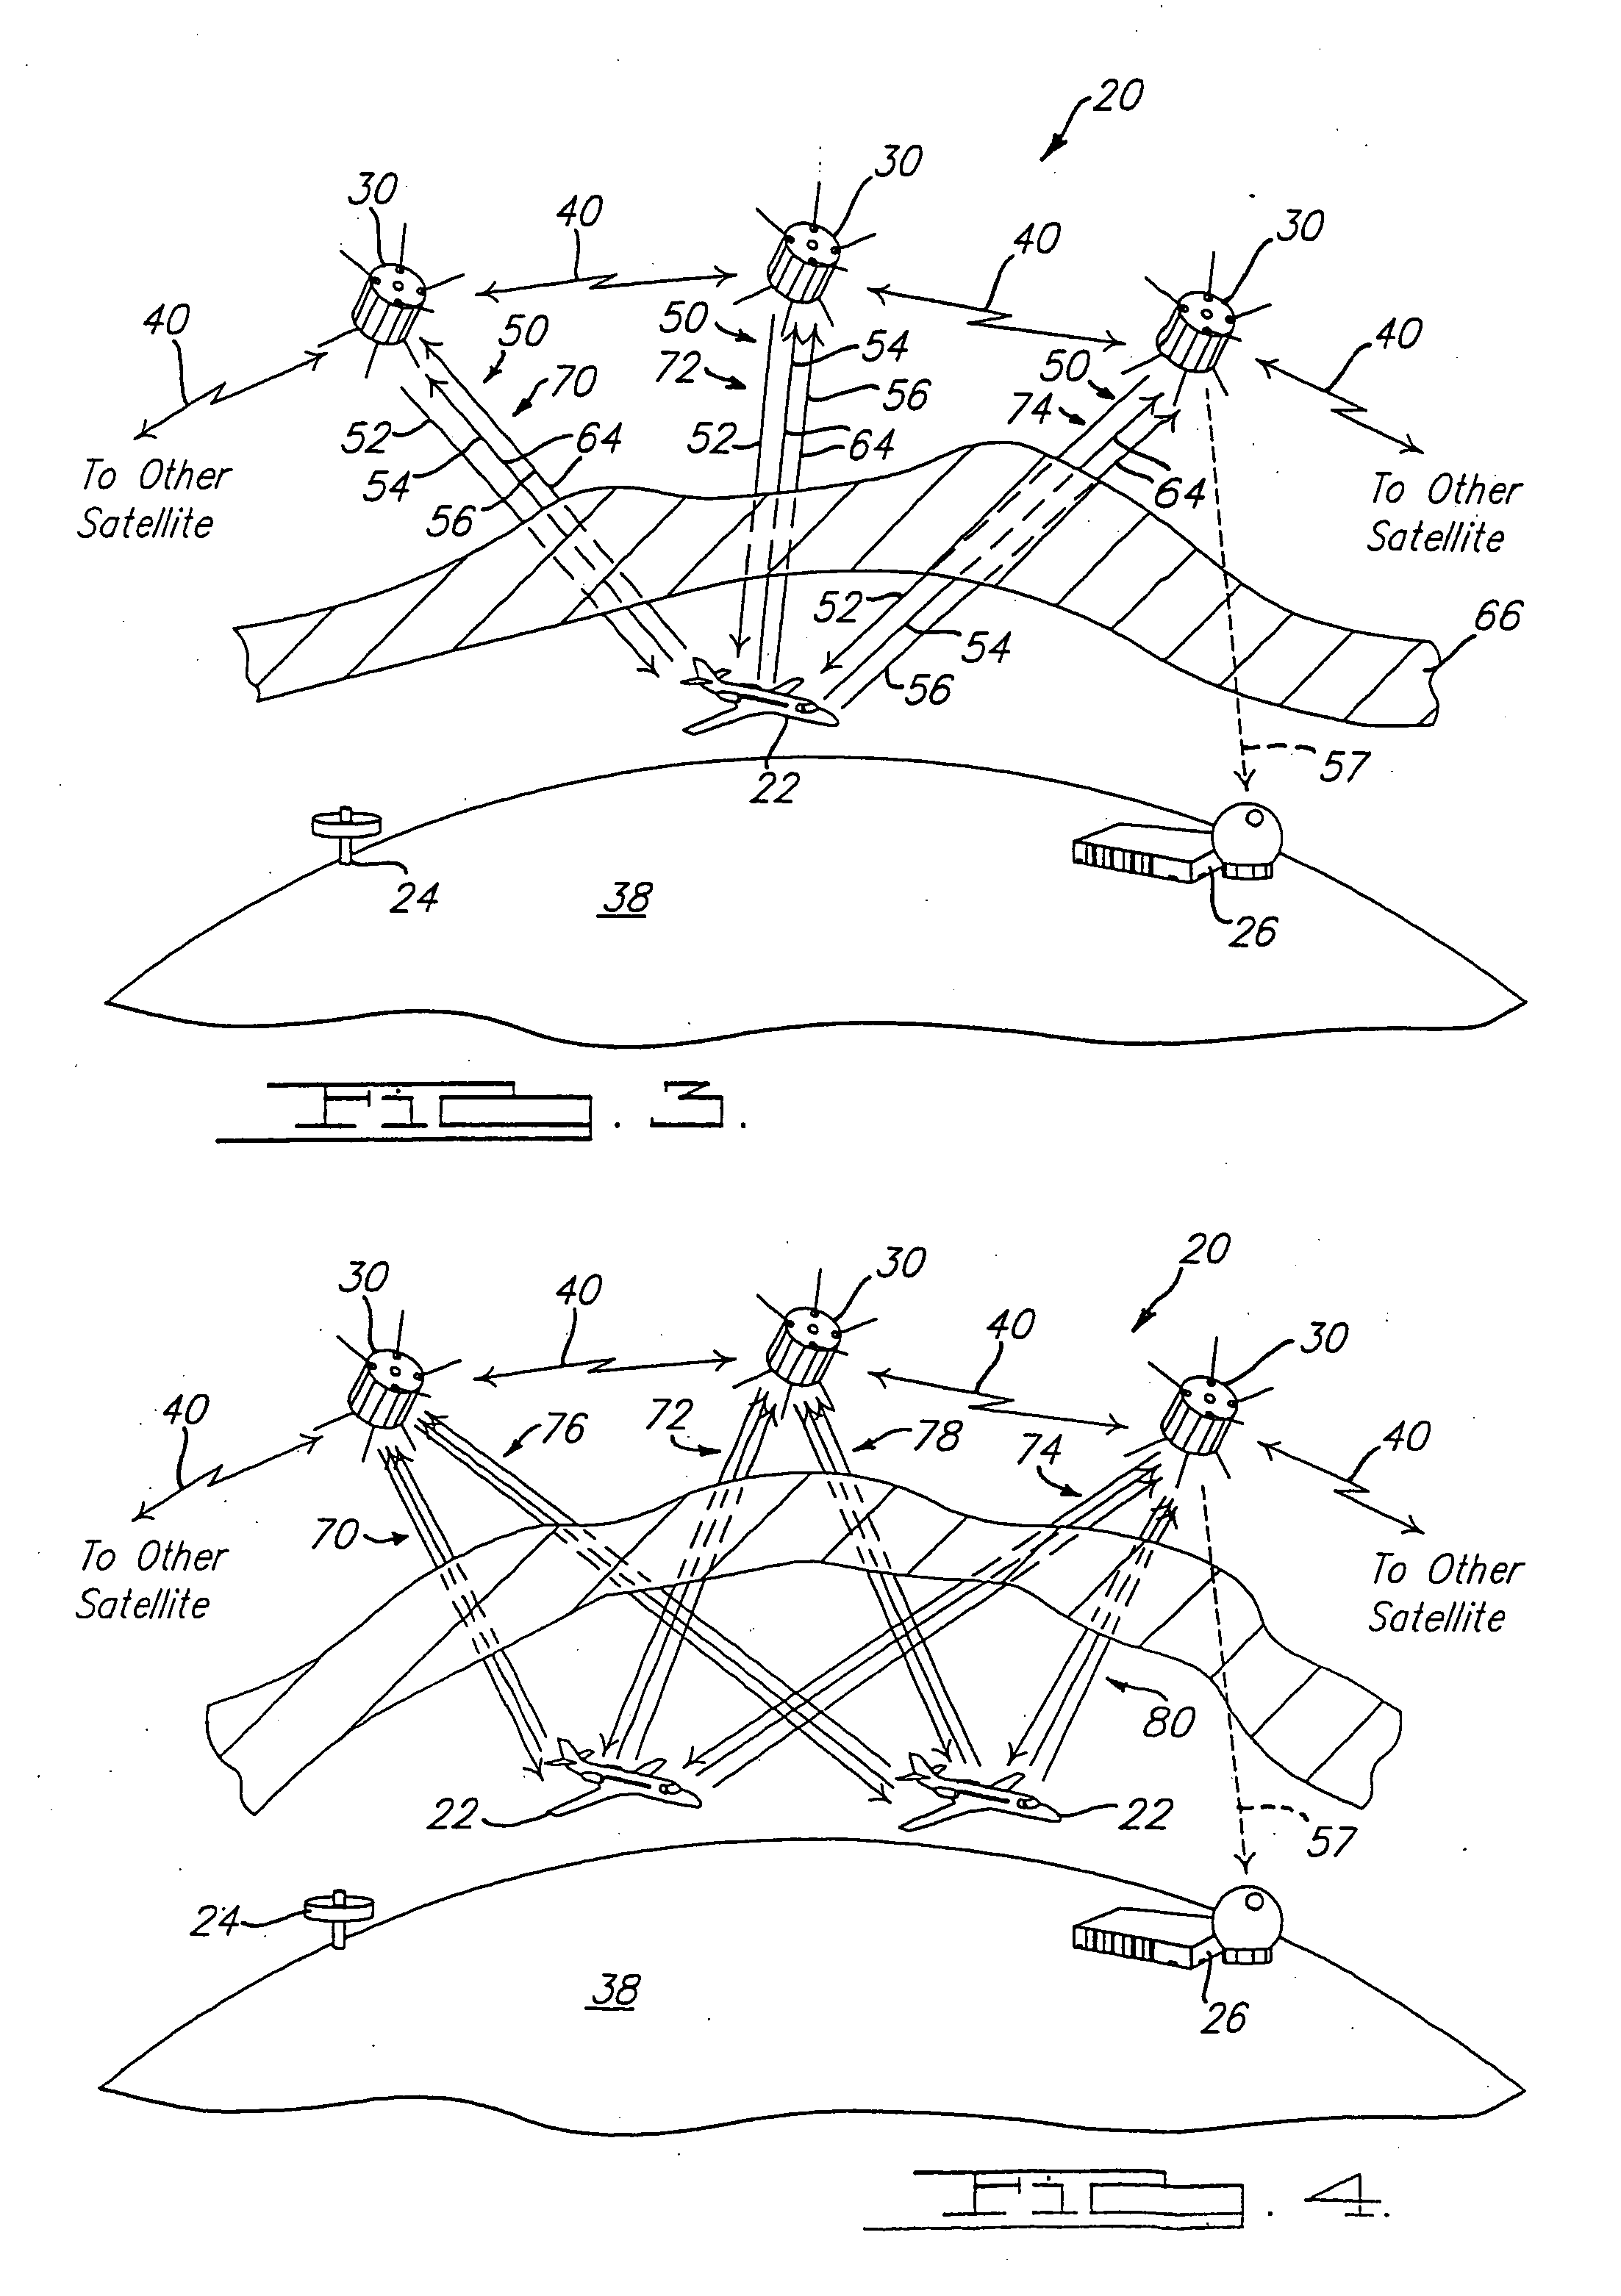 Method and apparatus for providing an integrated communications, navigation and surveillance satellite system